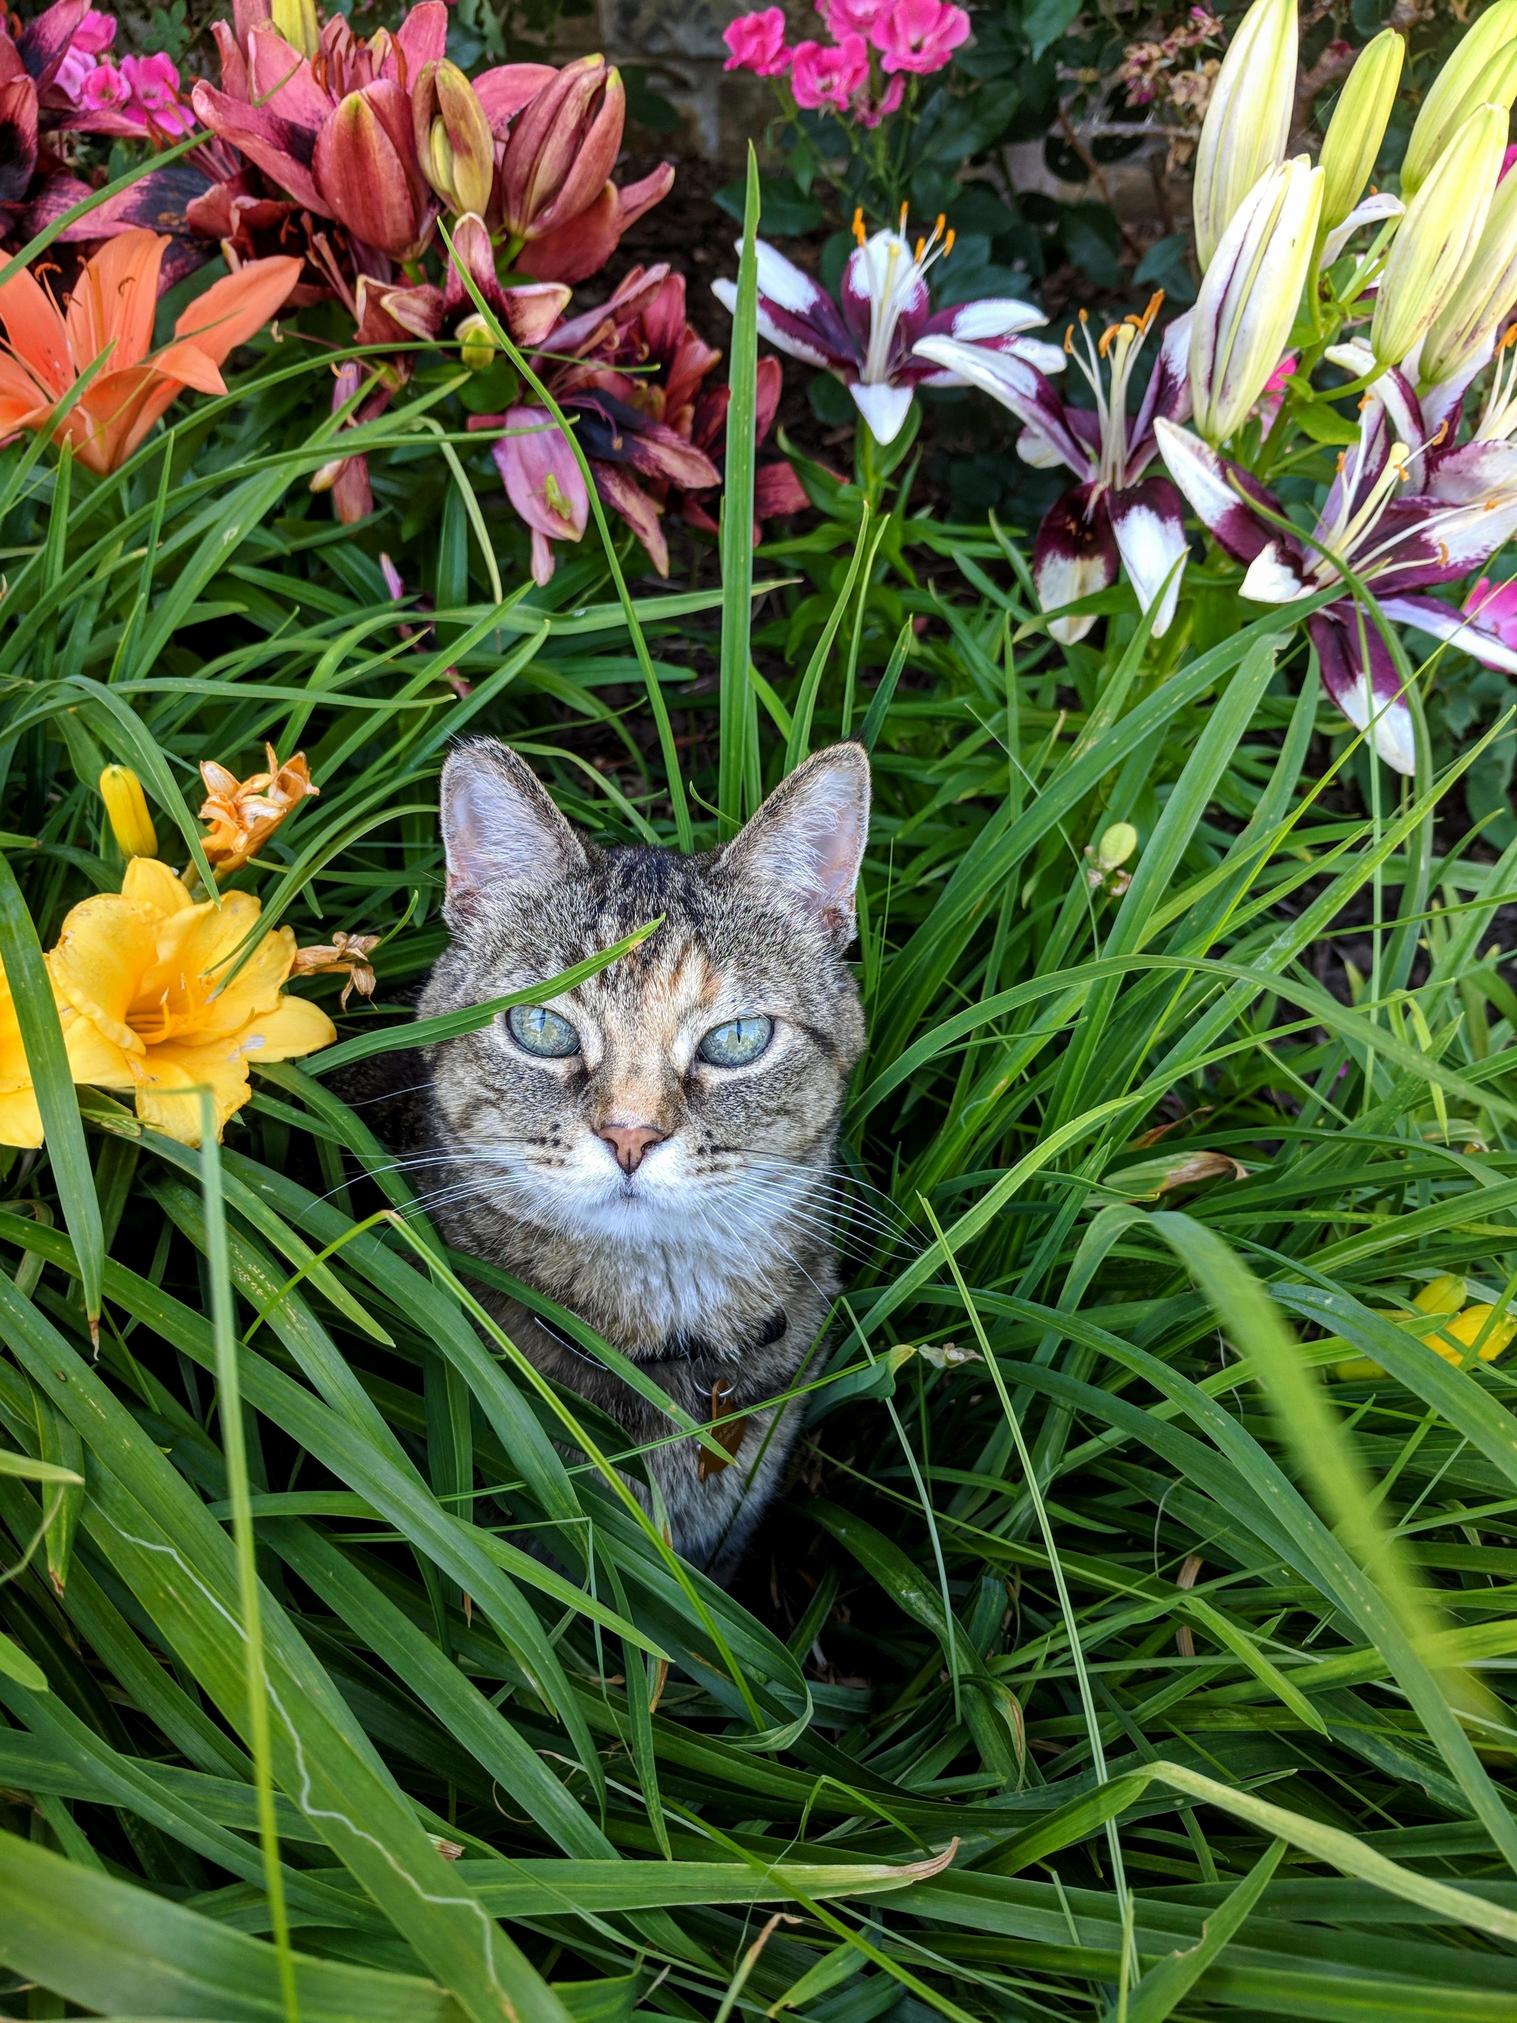 Nuffin to see here, just a buncha fowers, hooman. defunitlee no catz!  inside cat who isnt ready to go inside